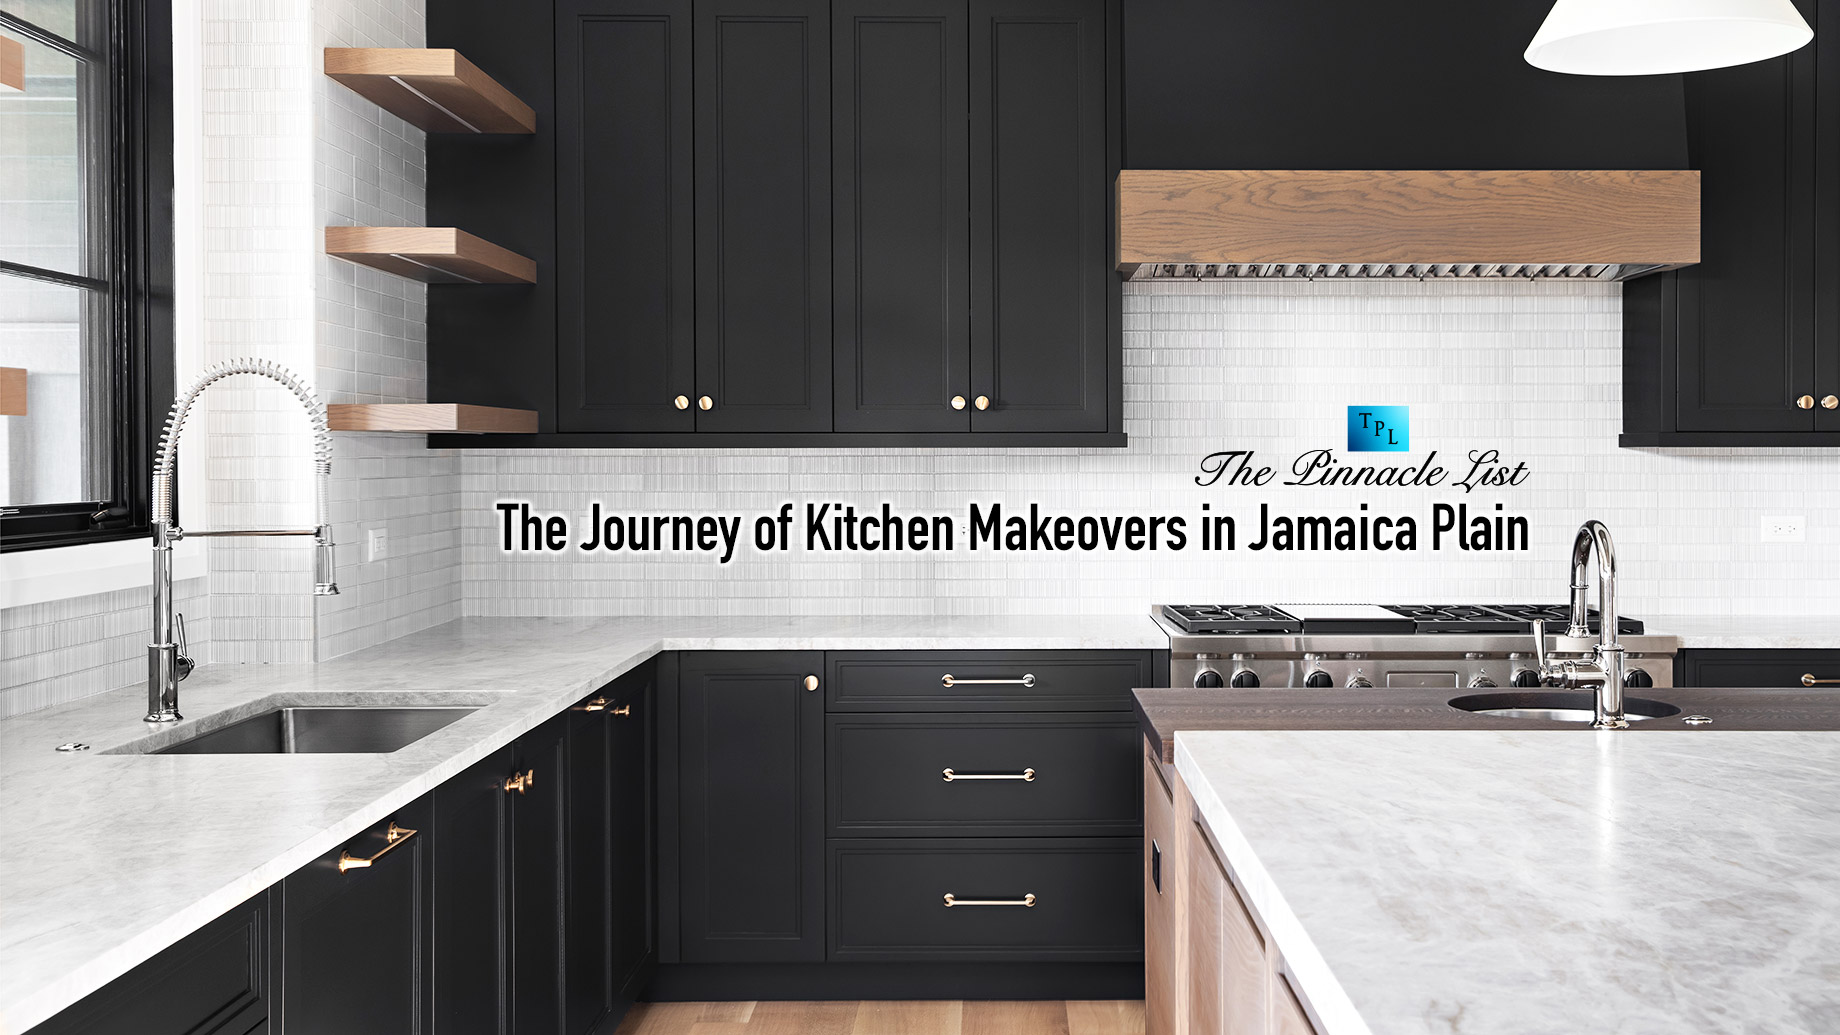 The Journey of Kitchen Makeovers in Jamaica Plain